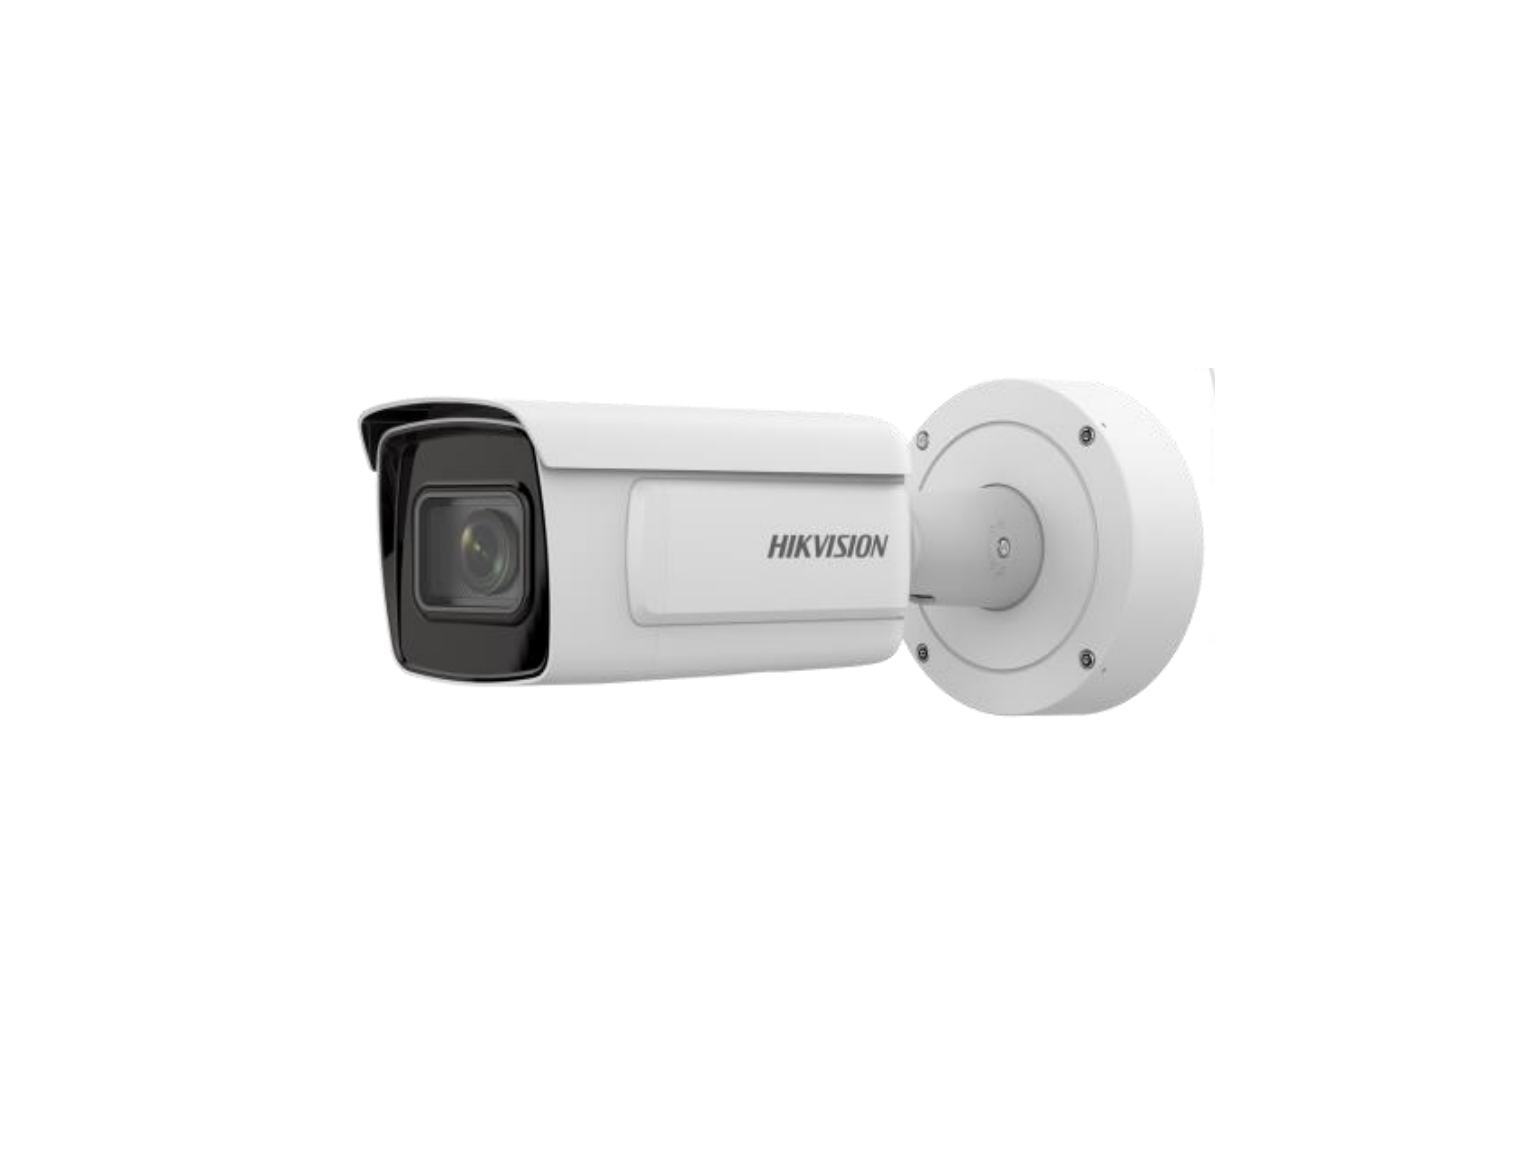 HIKVISION Bullet Network Camera iDS-2CD7A26G0 Specifications